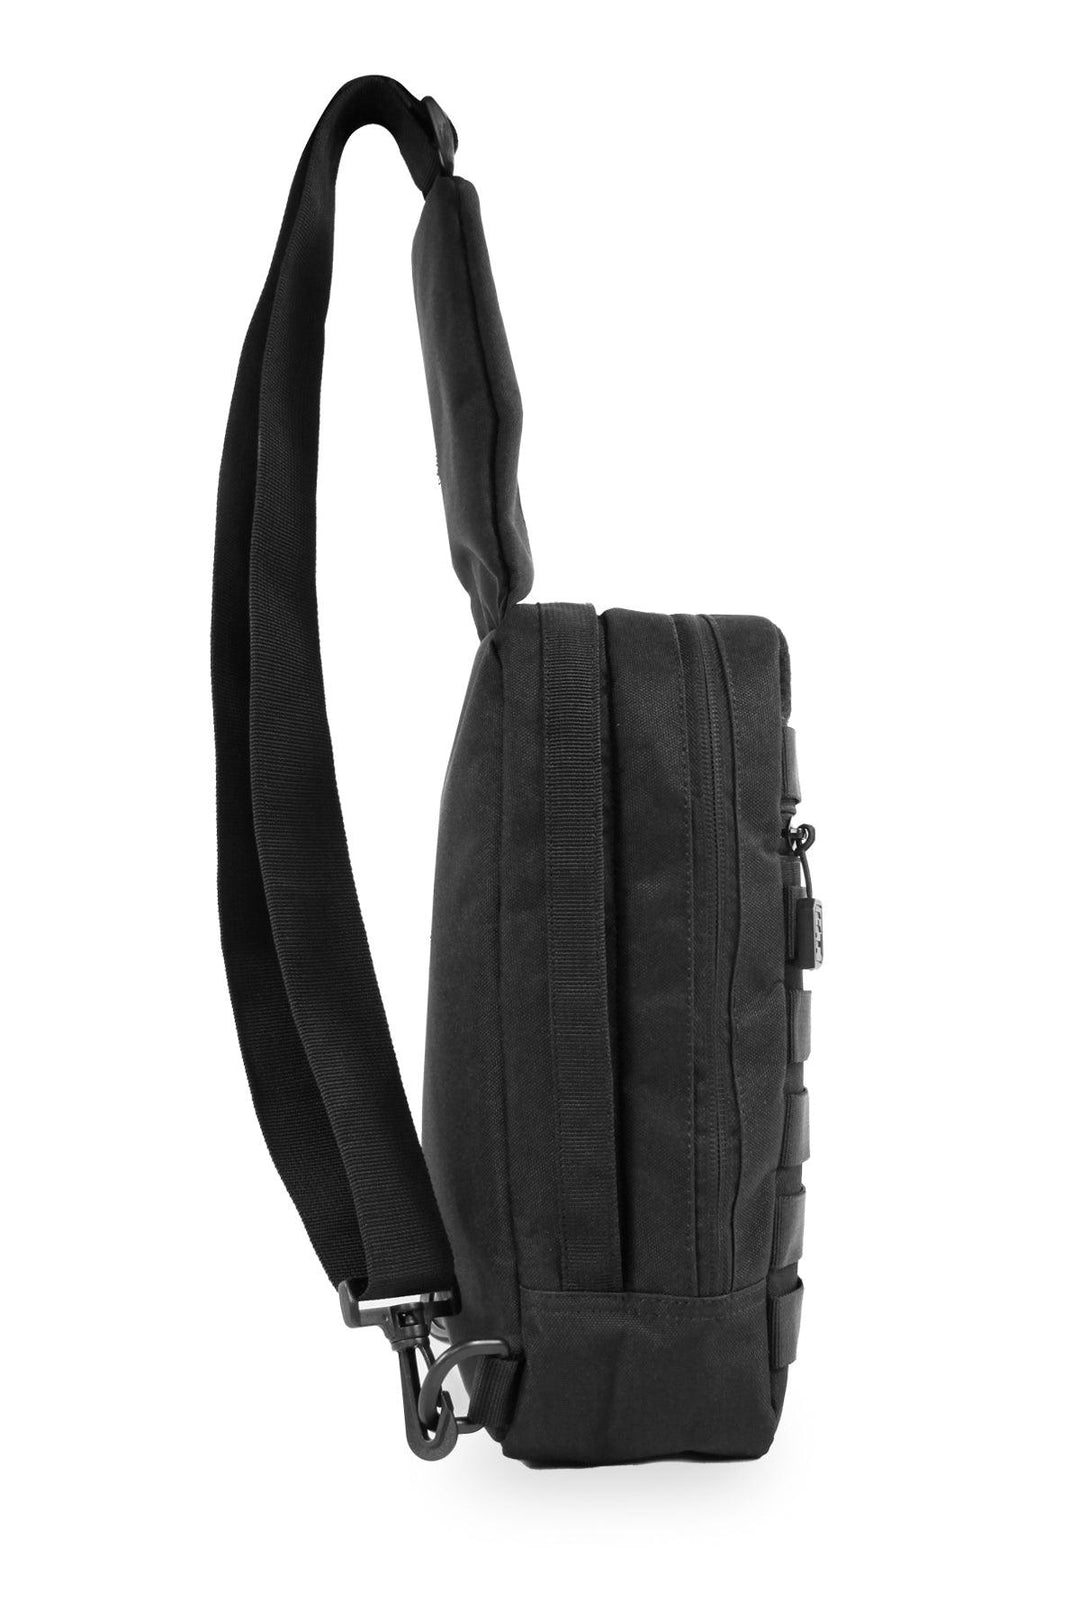 Unisex Crossbody Polyester Messenger One Side Sling Bag with